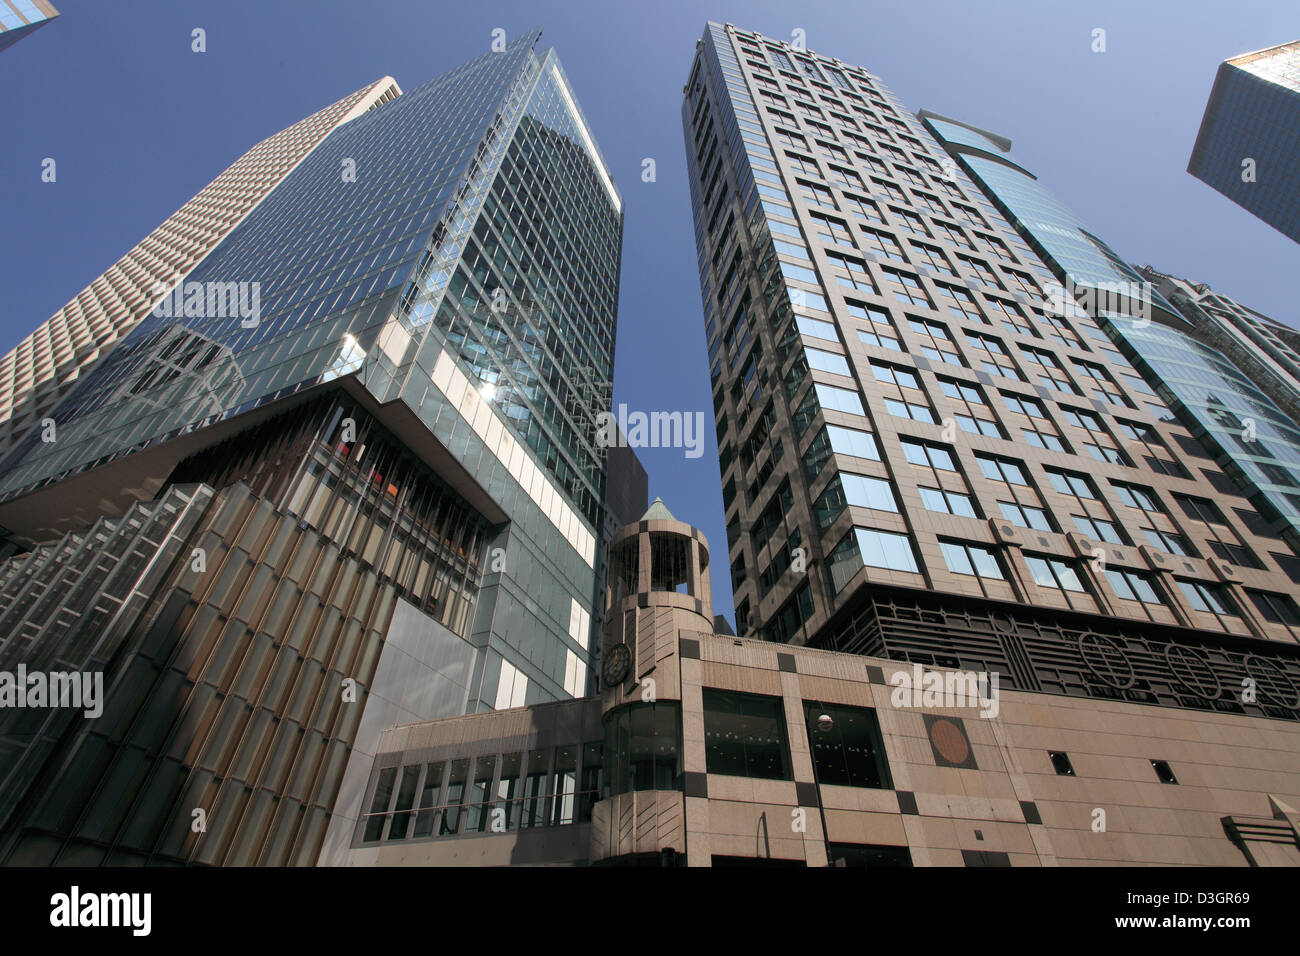 China, Hong Kong, Central district, skyscrapers, Stock Photo